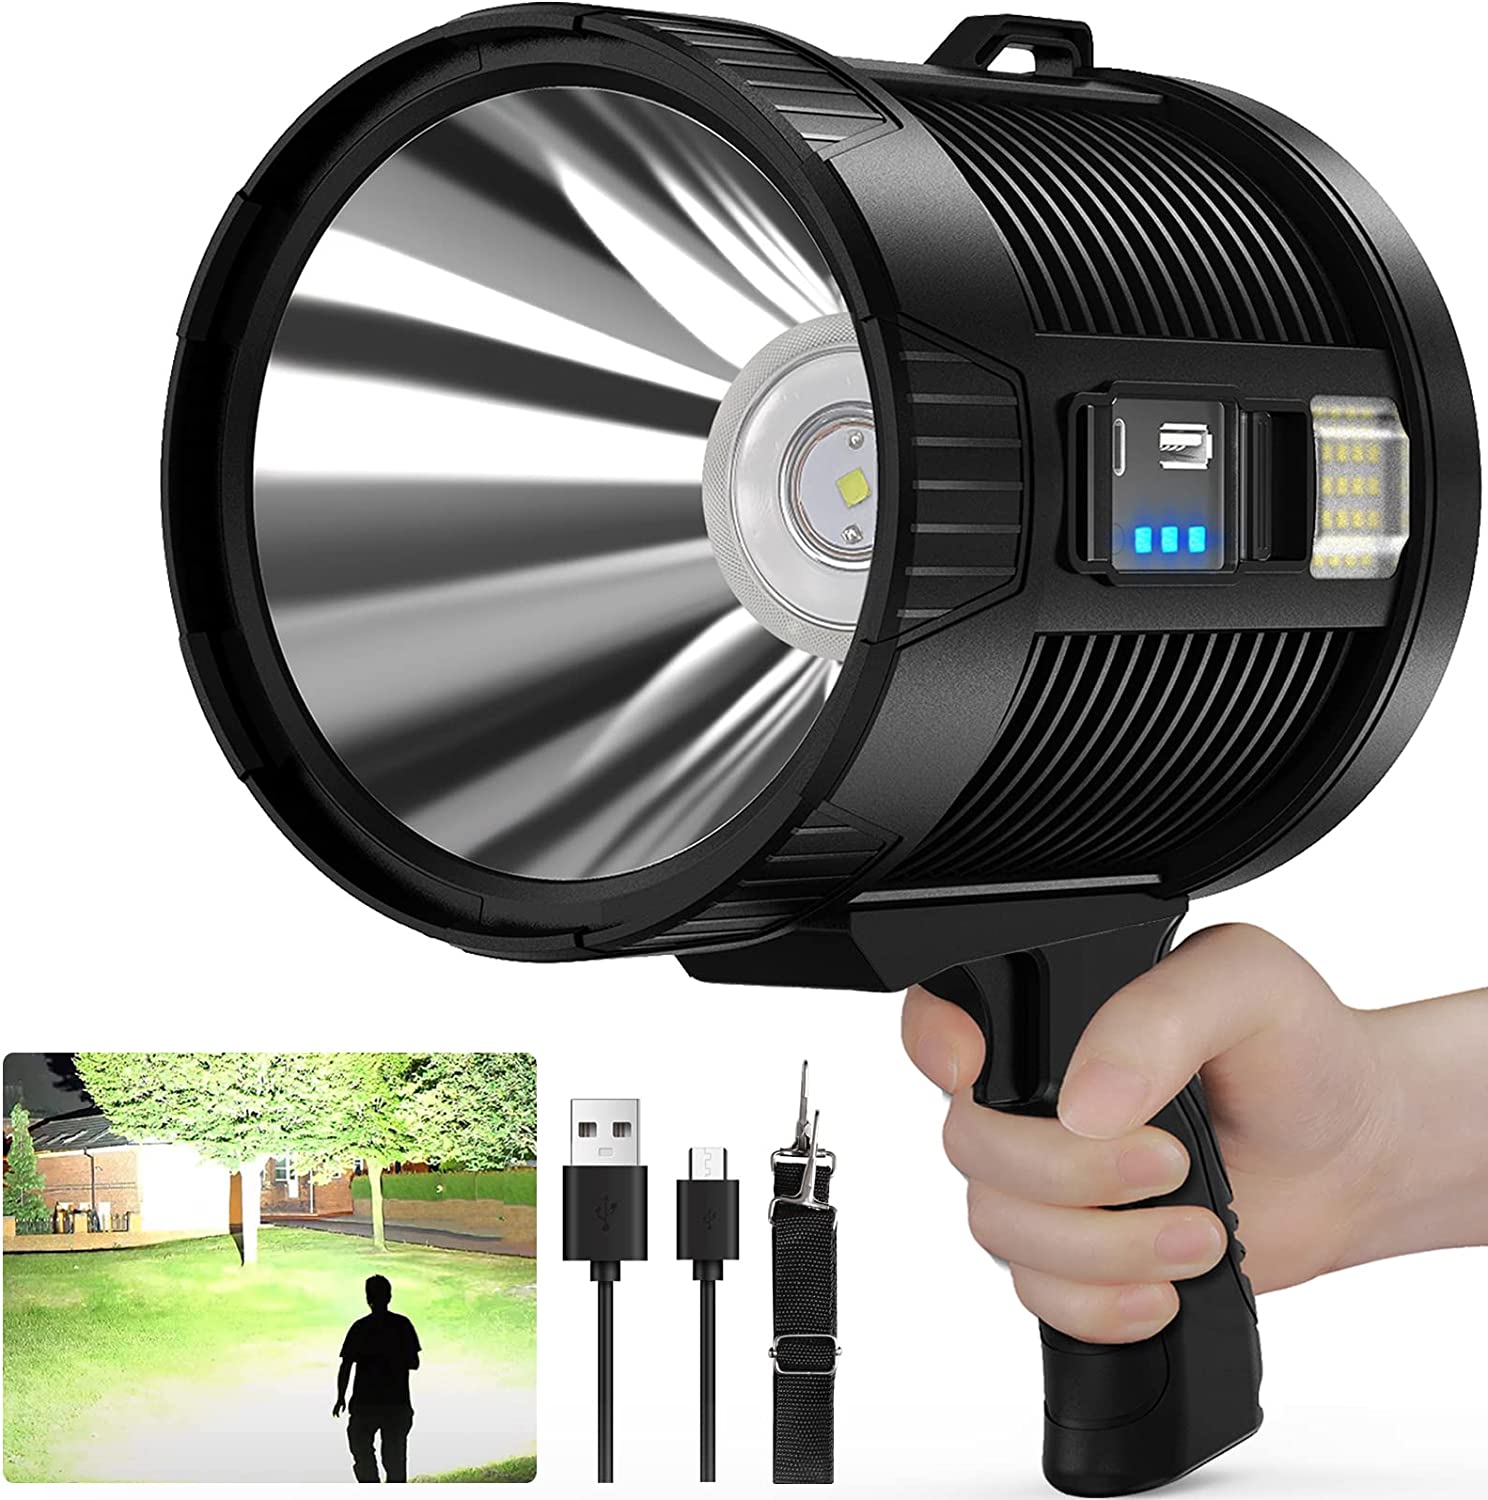 Rechargeable Spotlight Flashlight, Led Spot Lights Outdoor Handheld Spotlights for Hunting Boating Camping, 100000 Lumens Super Bright Waterproof Searchlight with 6 Modes, Cob Light and Solar Panels